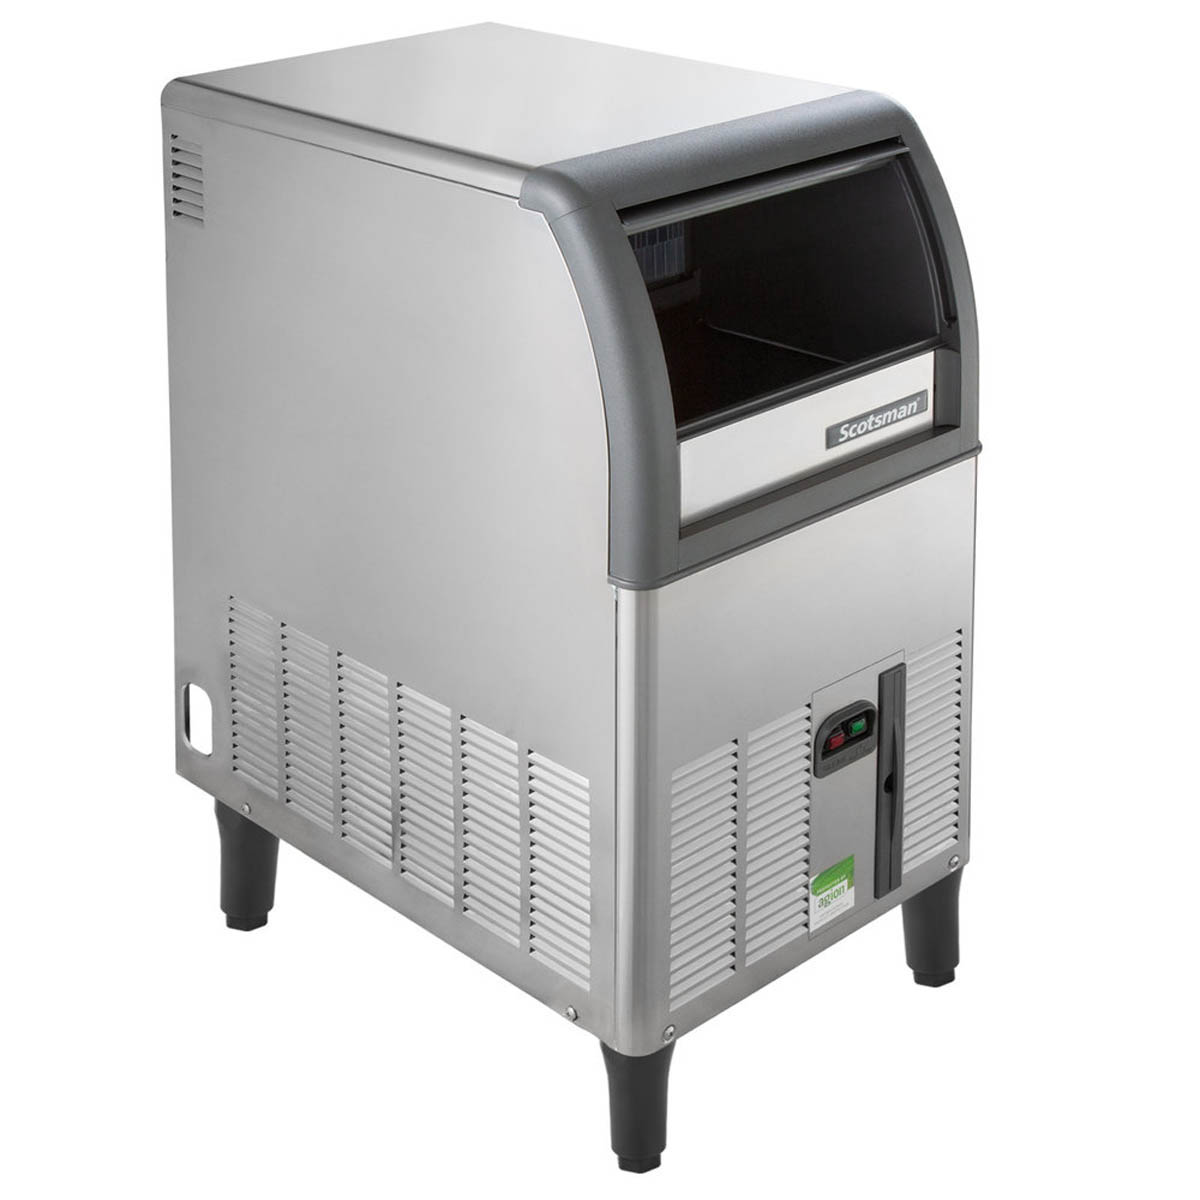 Scotsman CU0515GA-1 Self-Contained Under Counter Cuber with Storage, Chef's Deal